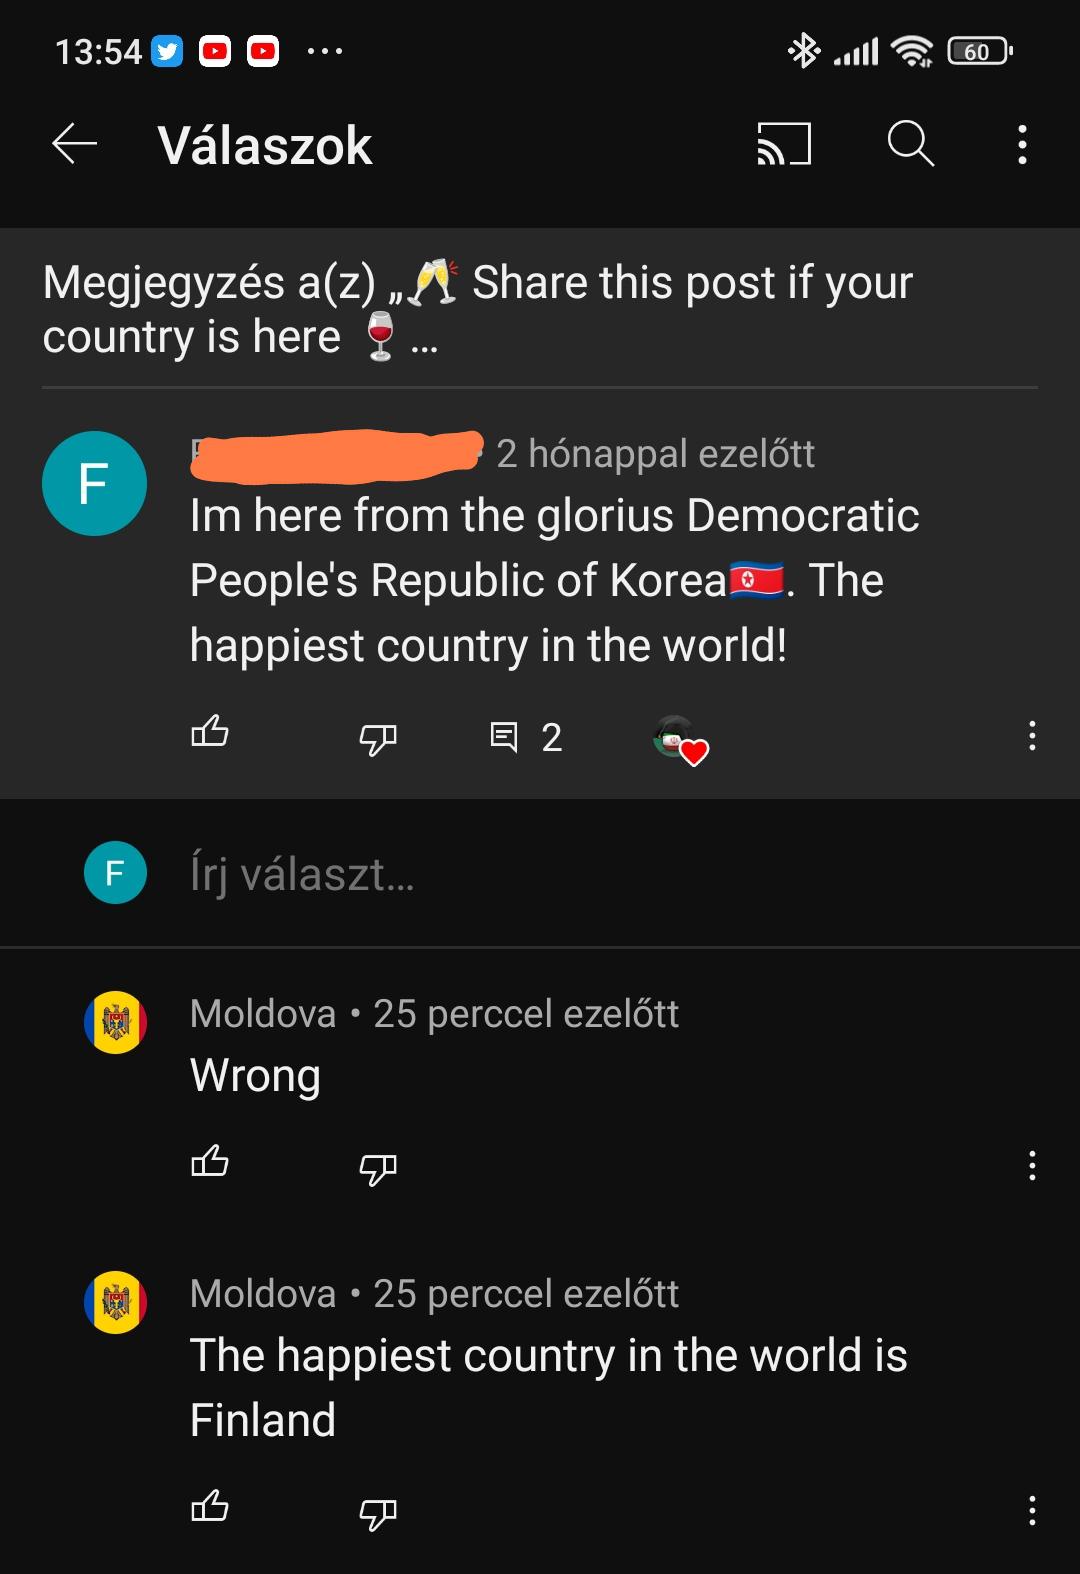 dumbs jokes - screenshot - Vlaszok Megjegyzs az this post if your country is here F F Ll 2 hnappal ezeltt Im here from the glorius Democratic People's Republic of Korea. The happiest country in the world! 2 rj vlaszt... Moldova 25 perccel ezeltt Wrong Mol